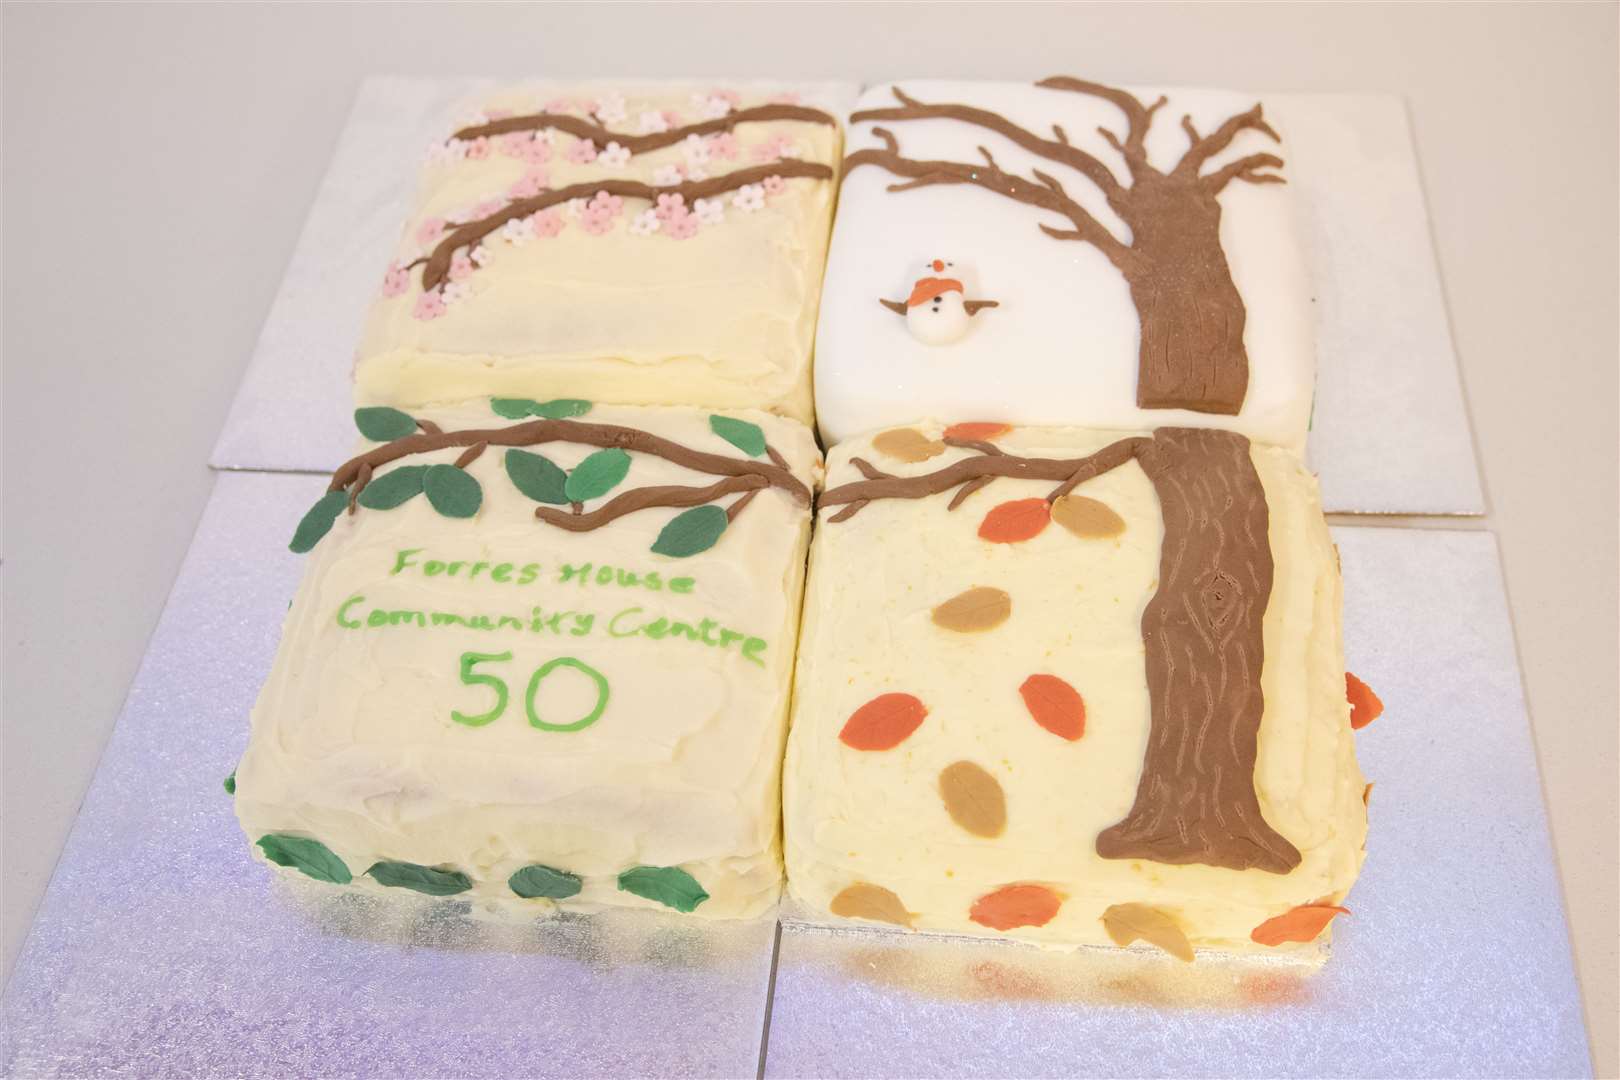 A cake was shared in celebration of the centre's 50th birthday.